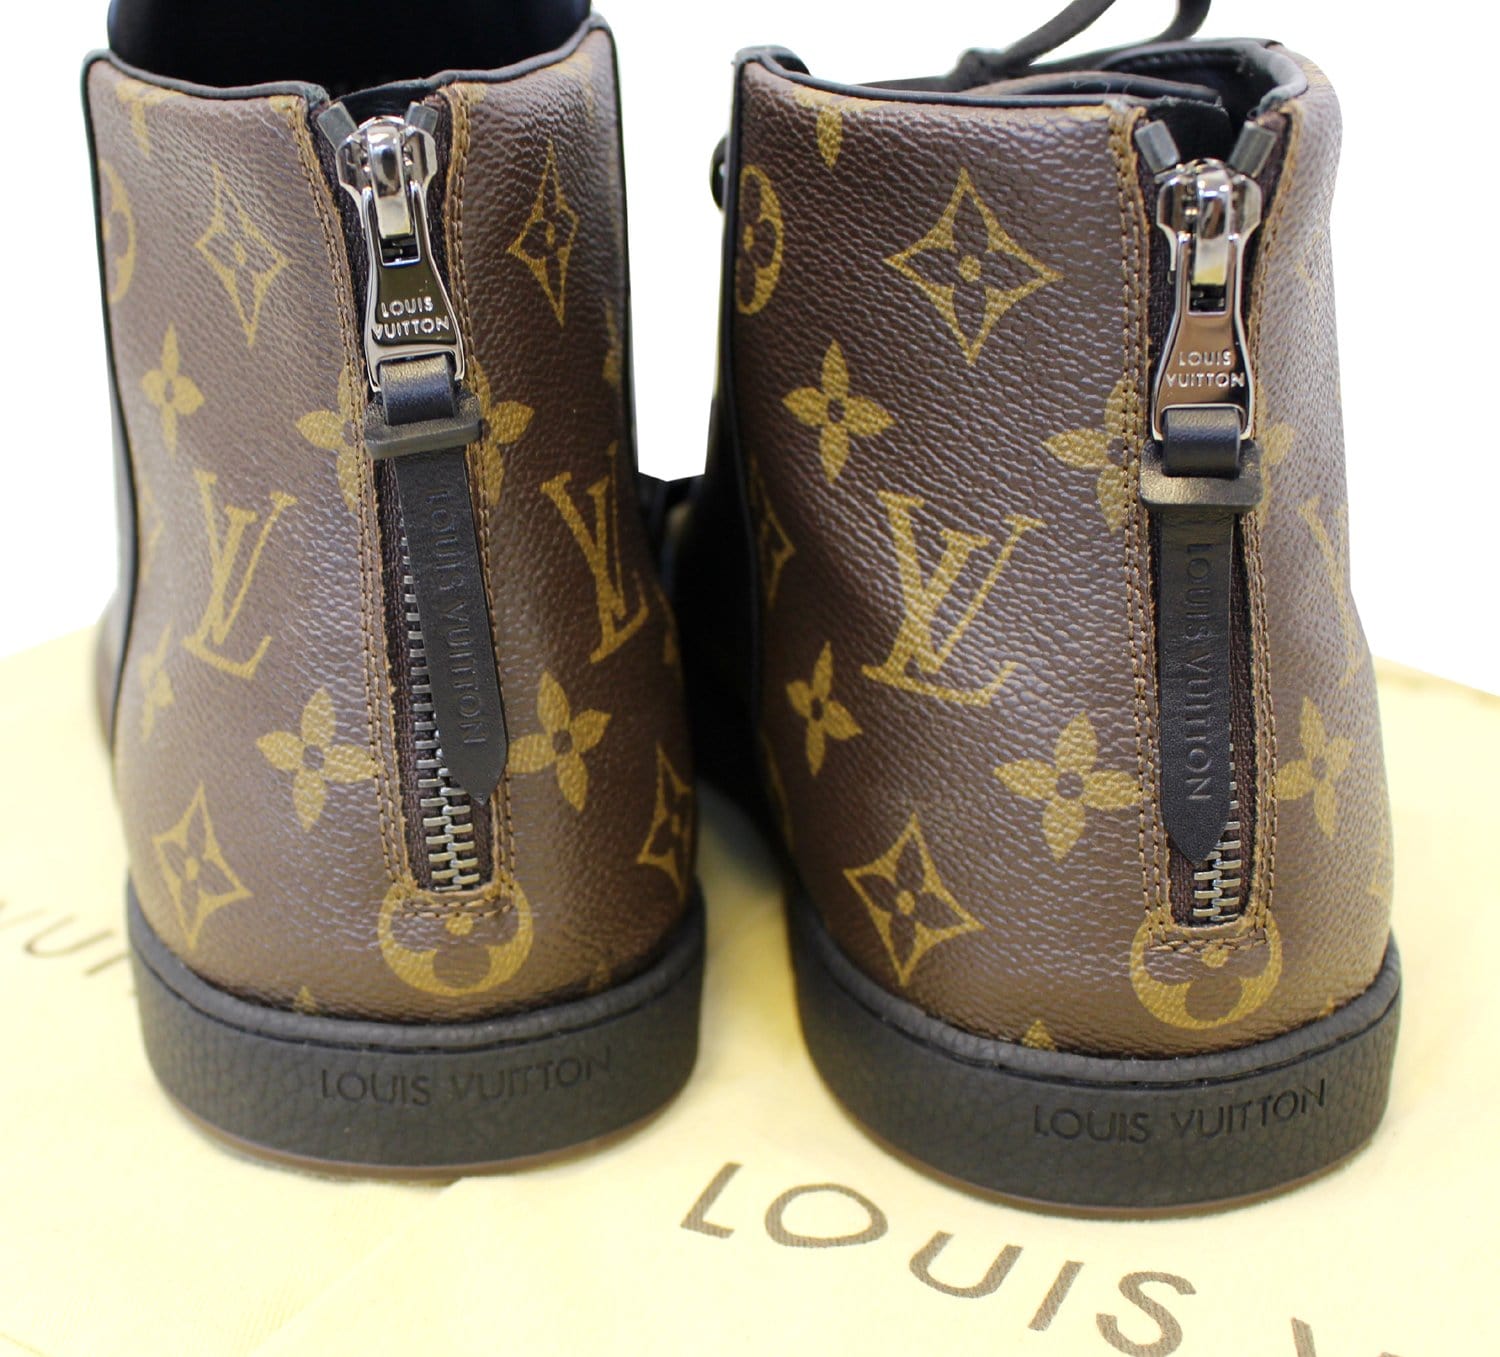 Louis Vuitton Men's Black and Brown Monogram High-Top Sneakers - US  Size 8.5